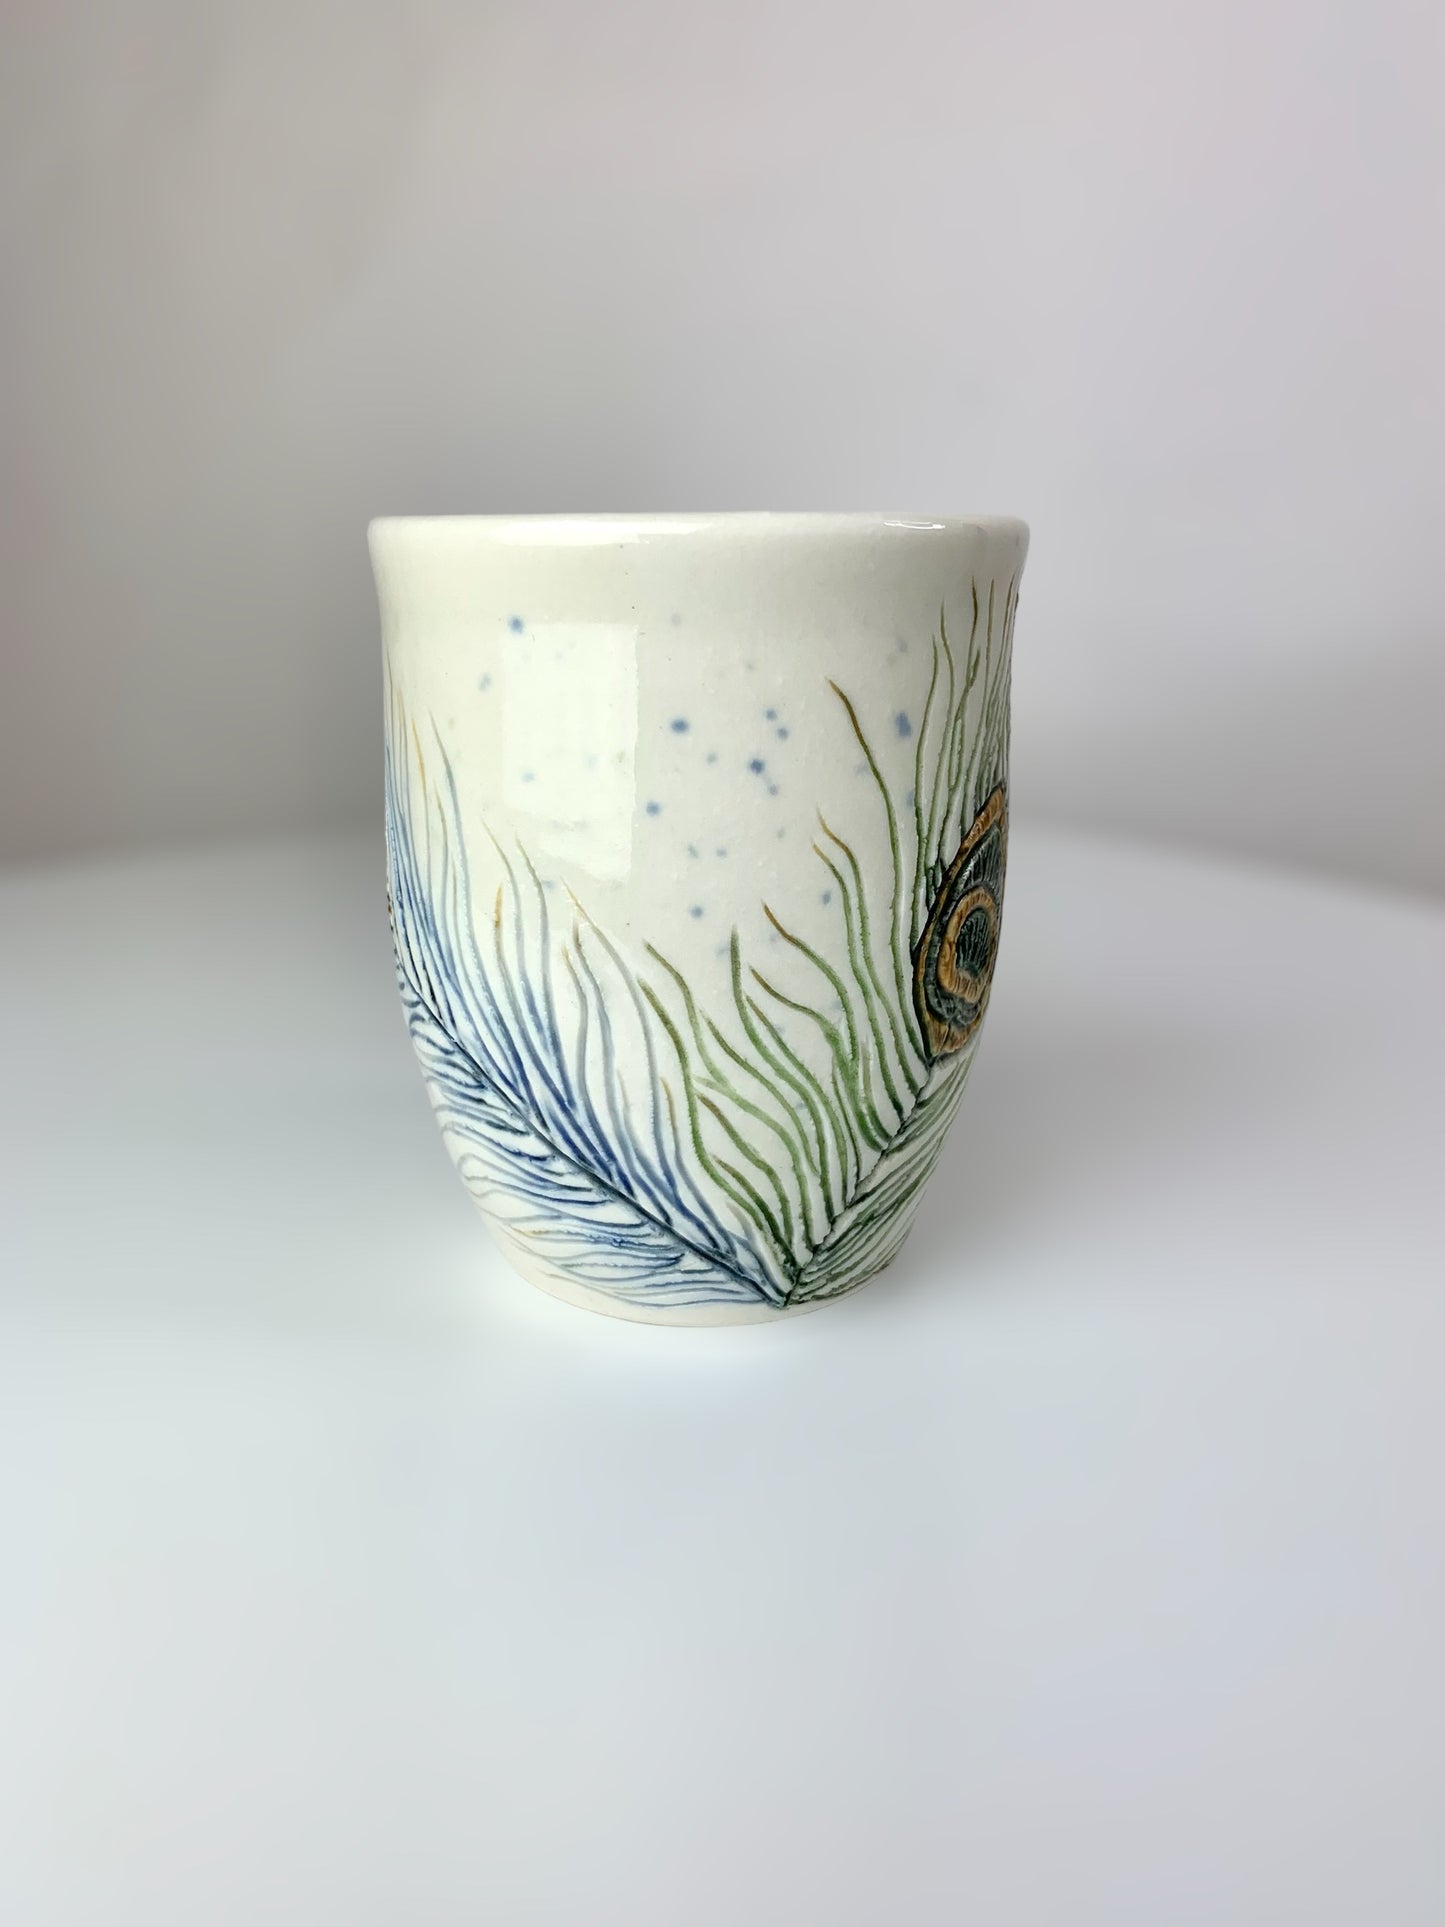 Porcelain mug with peacock feathers